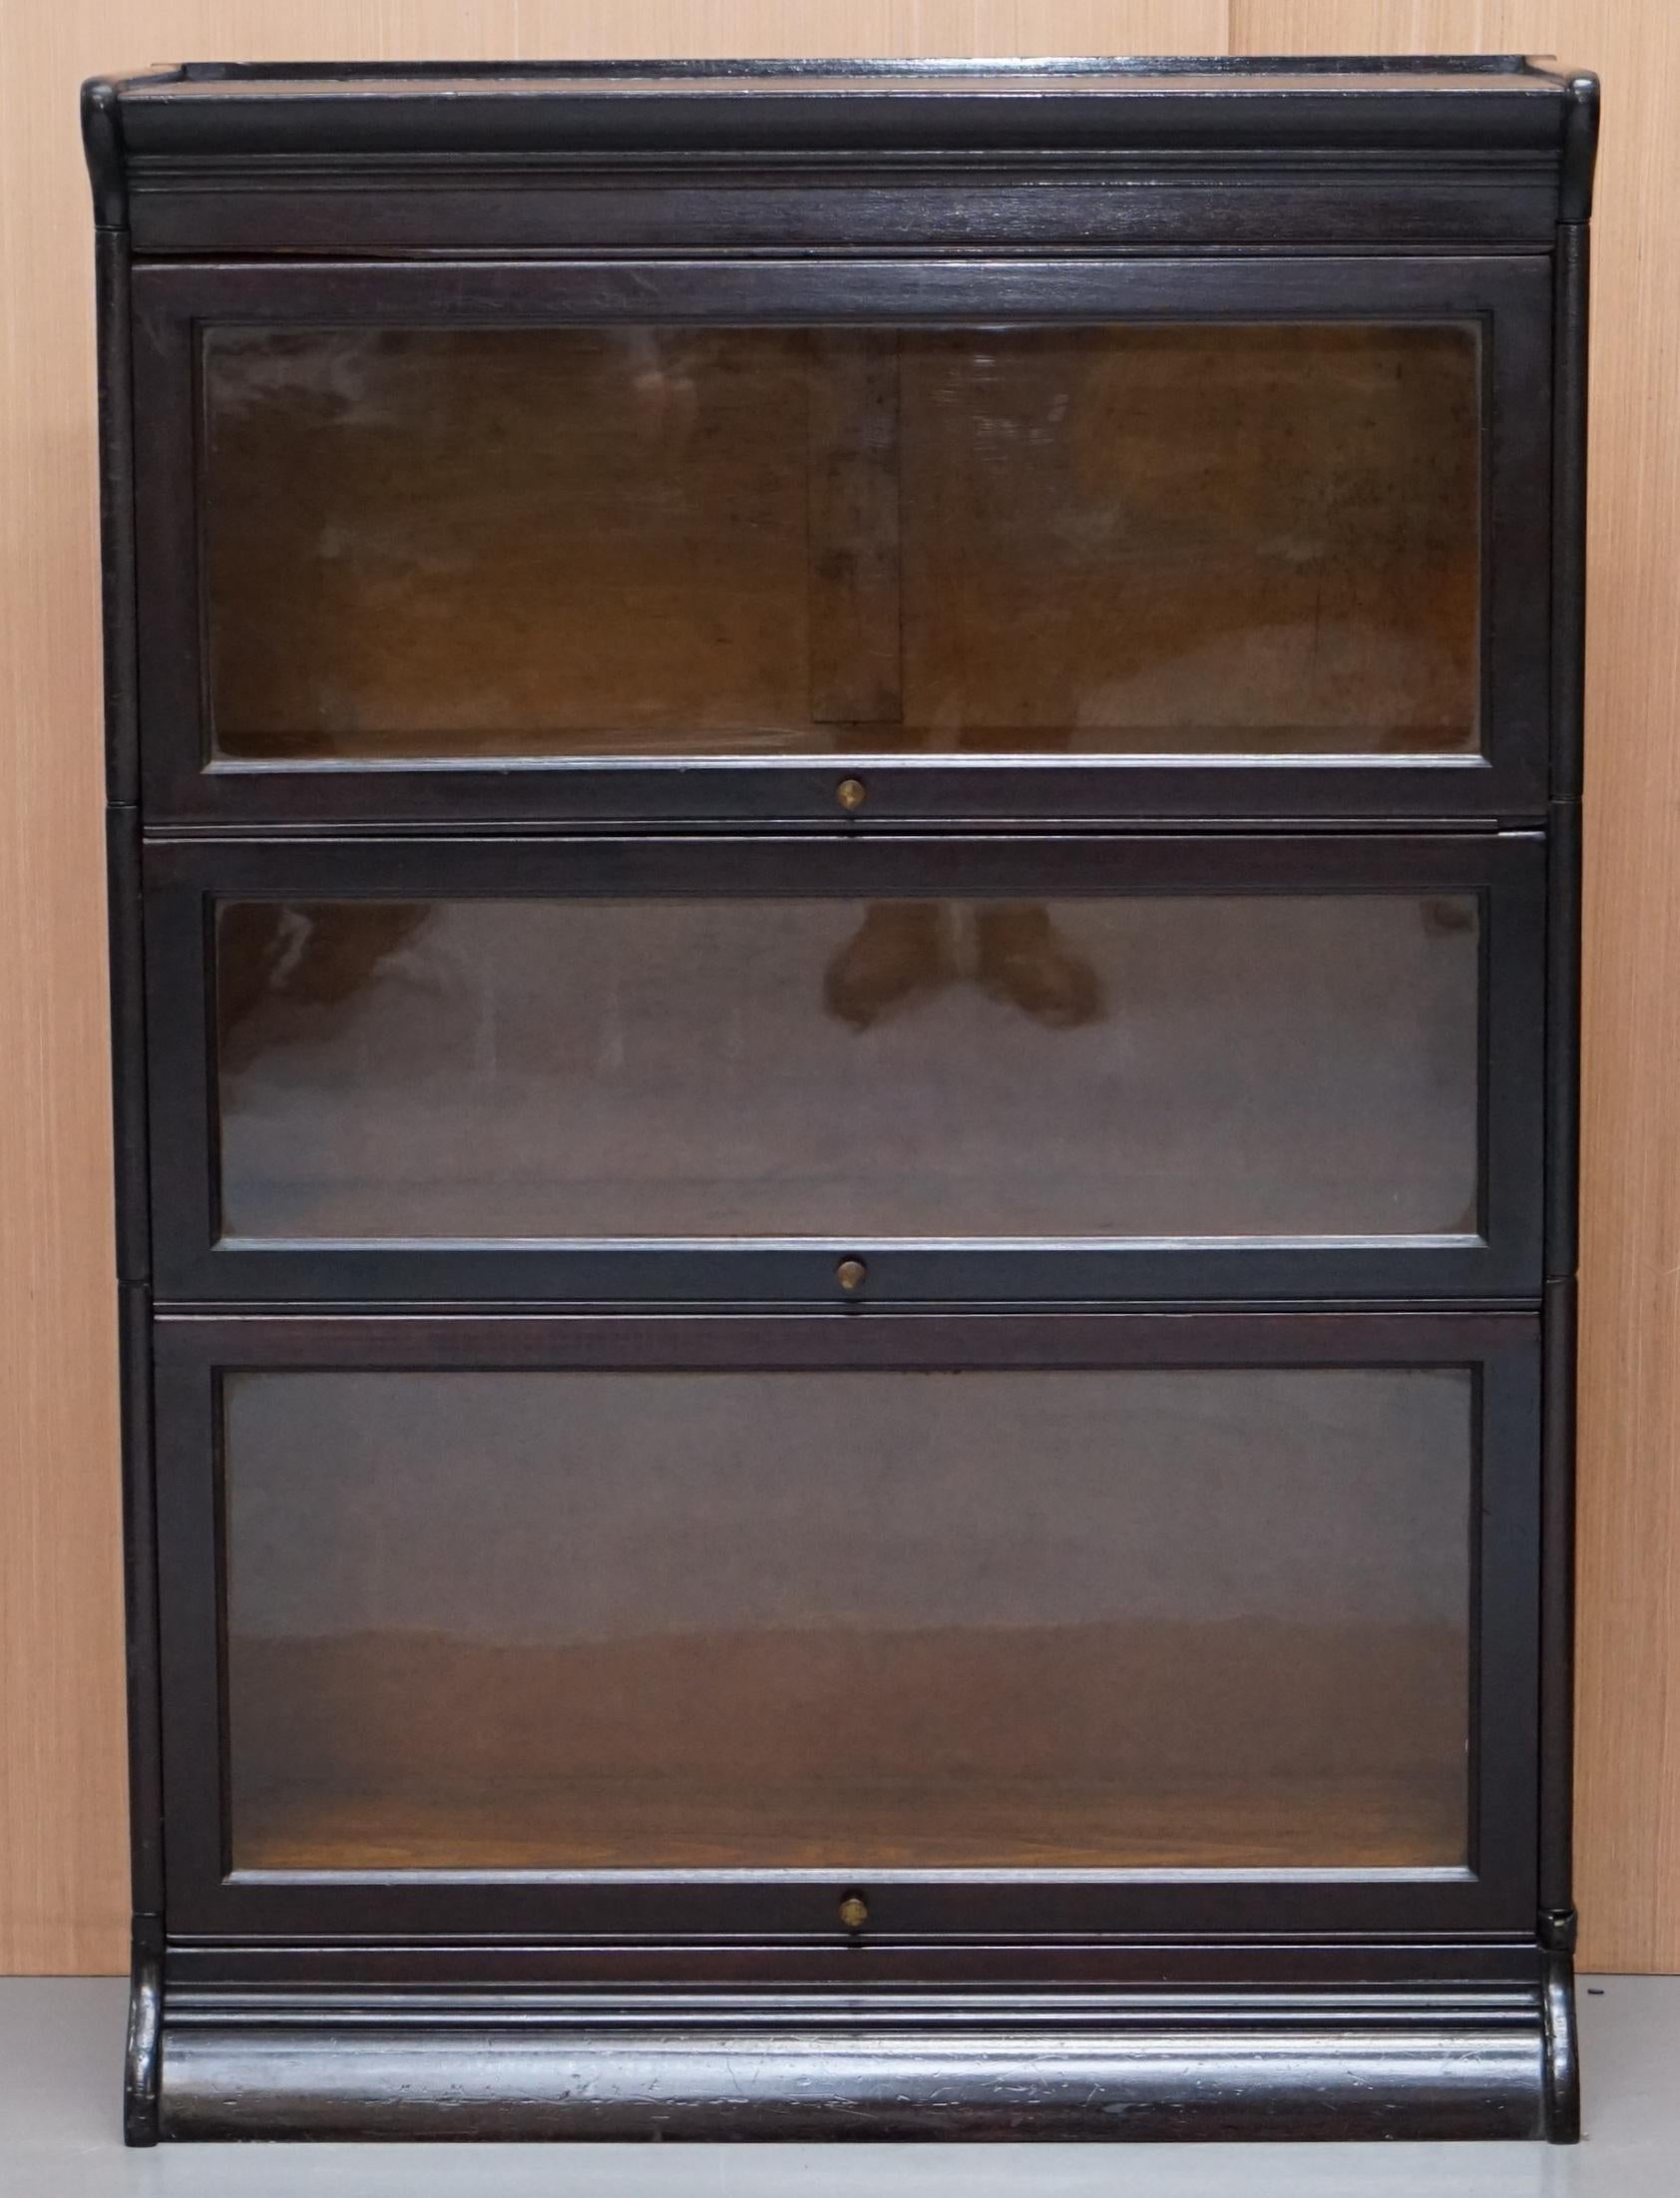 We are delighted to offer for sale this lovely early circa 1930 Globe Wernickie stacking legal bookcase 

A very good looking and well-made piece, there were a number of companies making this type of bookcase in the late Edwardian era up to